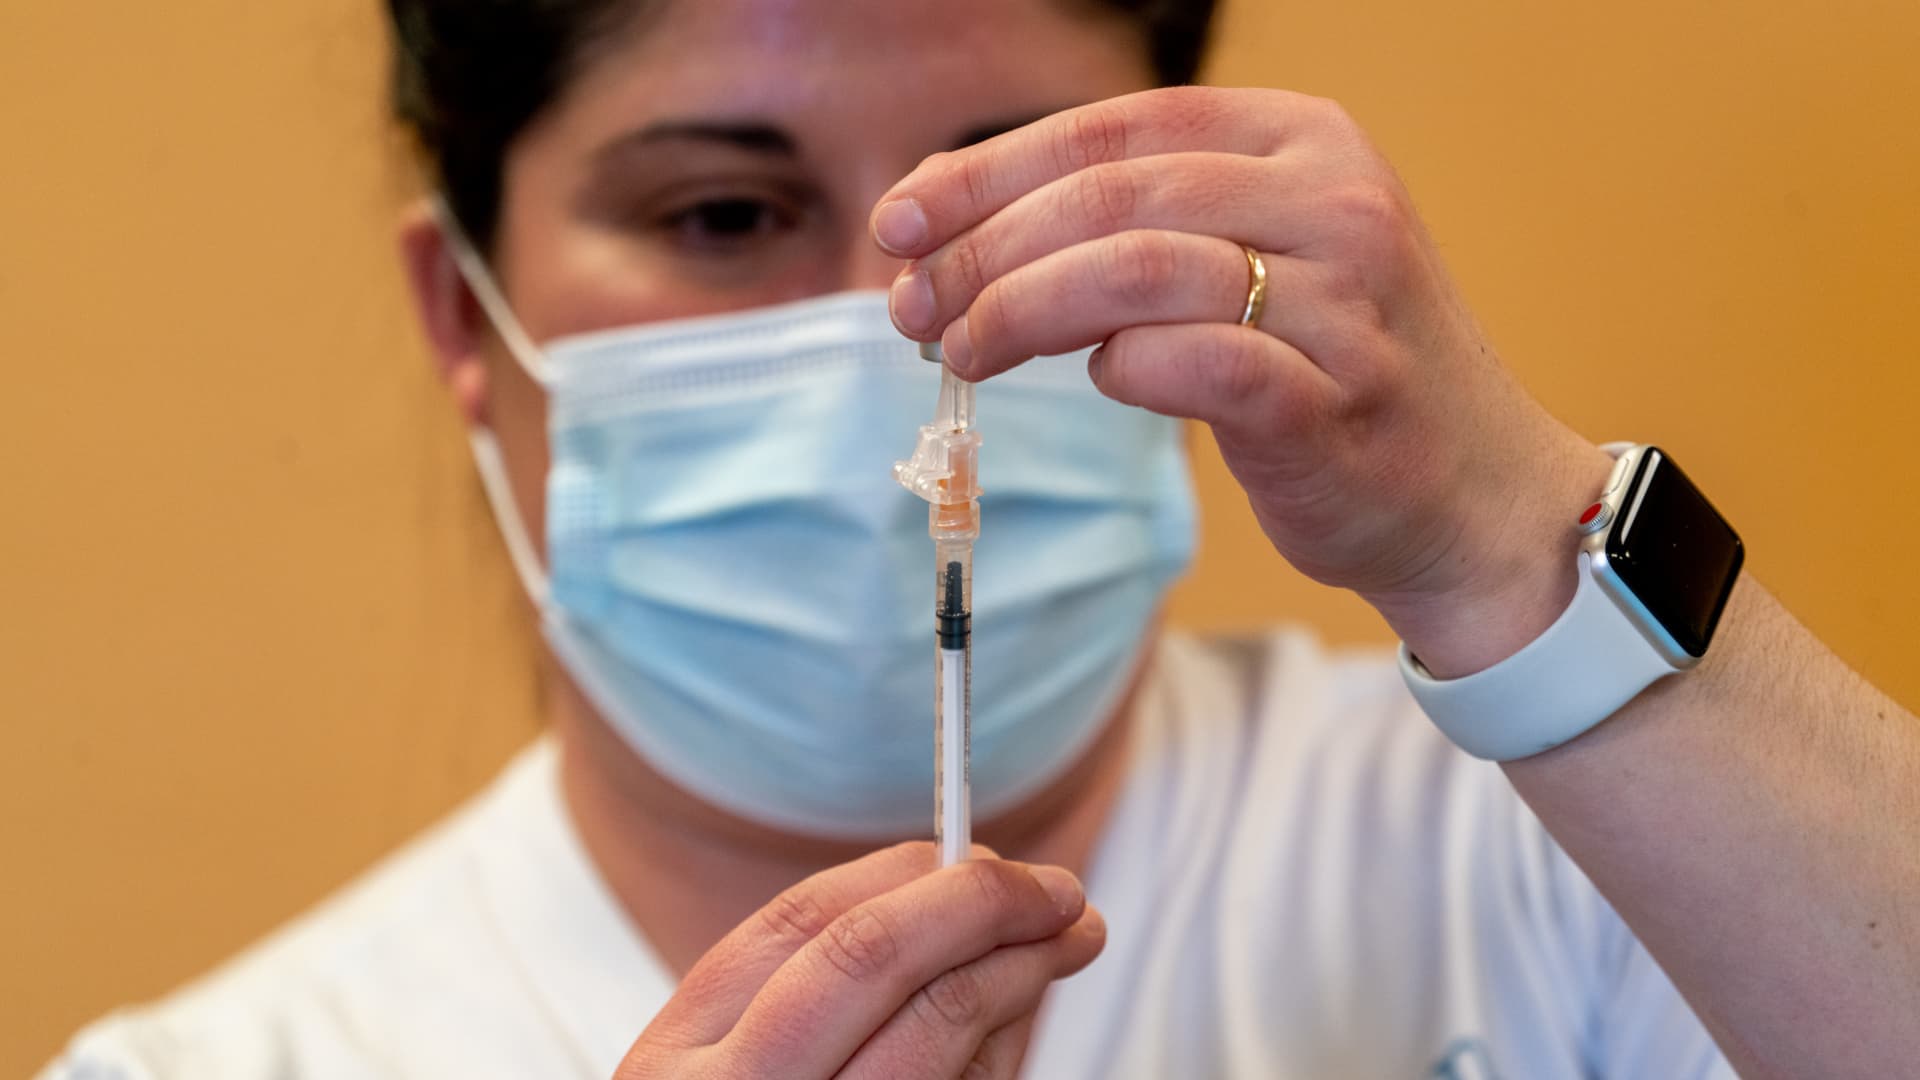 Here's why Covid vaccines will still be free for uninsured Americans as public health emergency ends